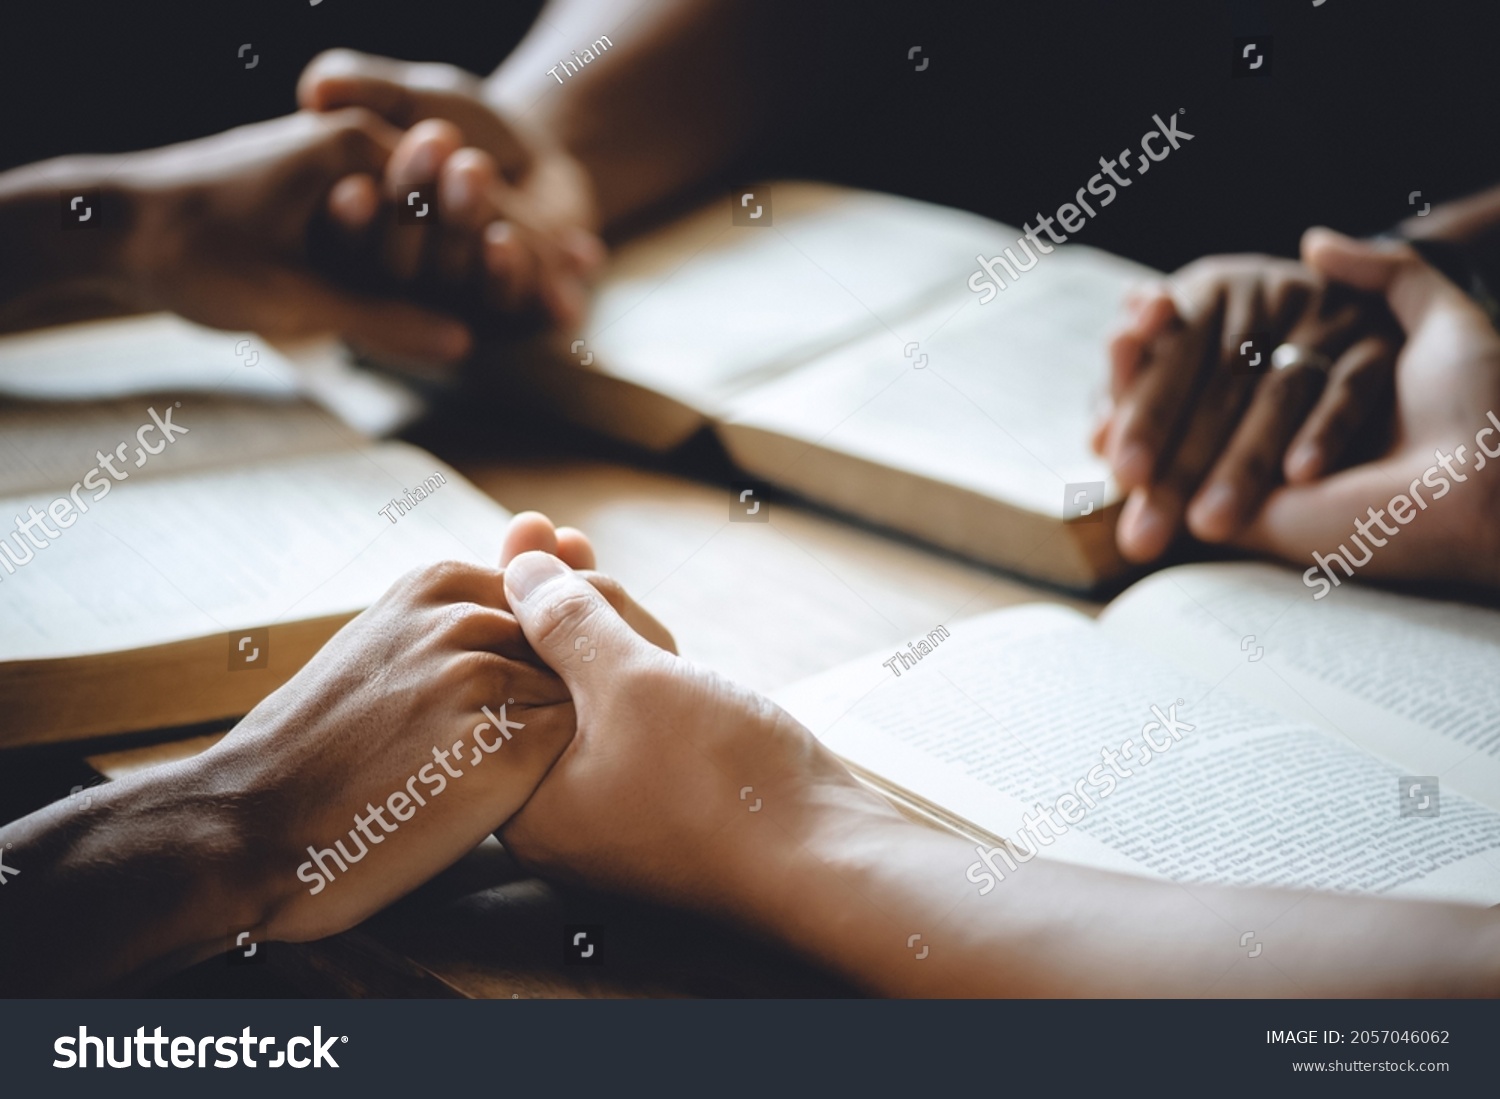 Christian group of people holding hands praying worship to believe and Bible on a wooden table for devotional or prayer meeting concept. #2057046062